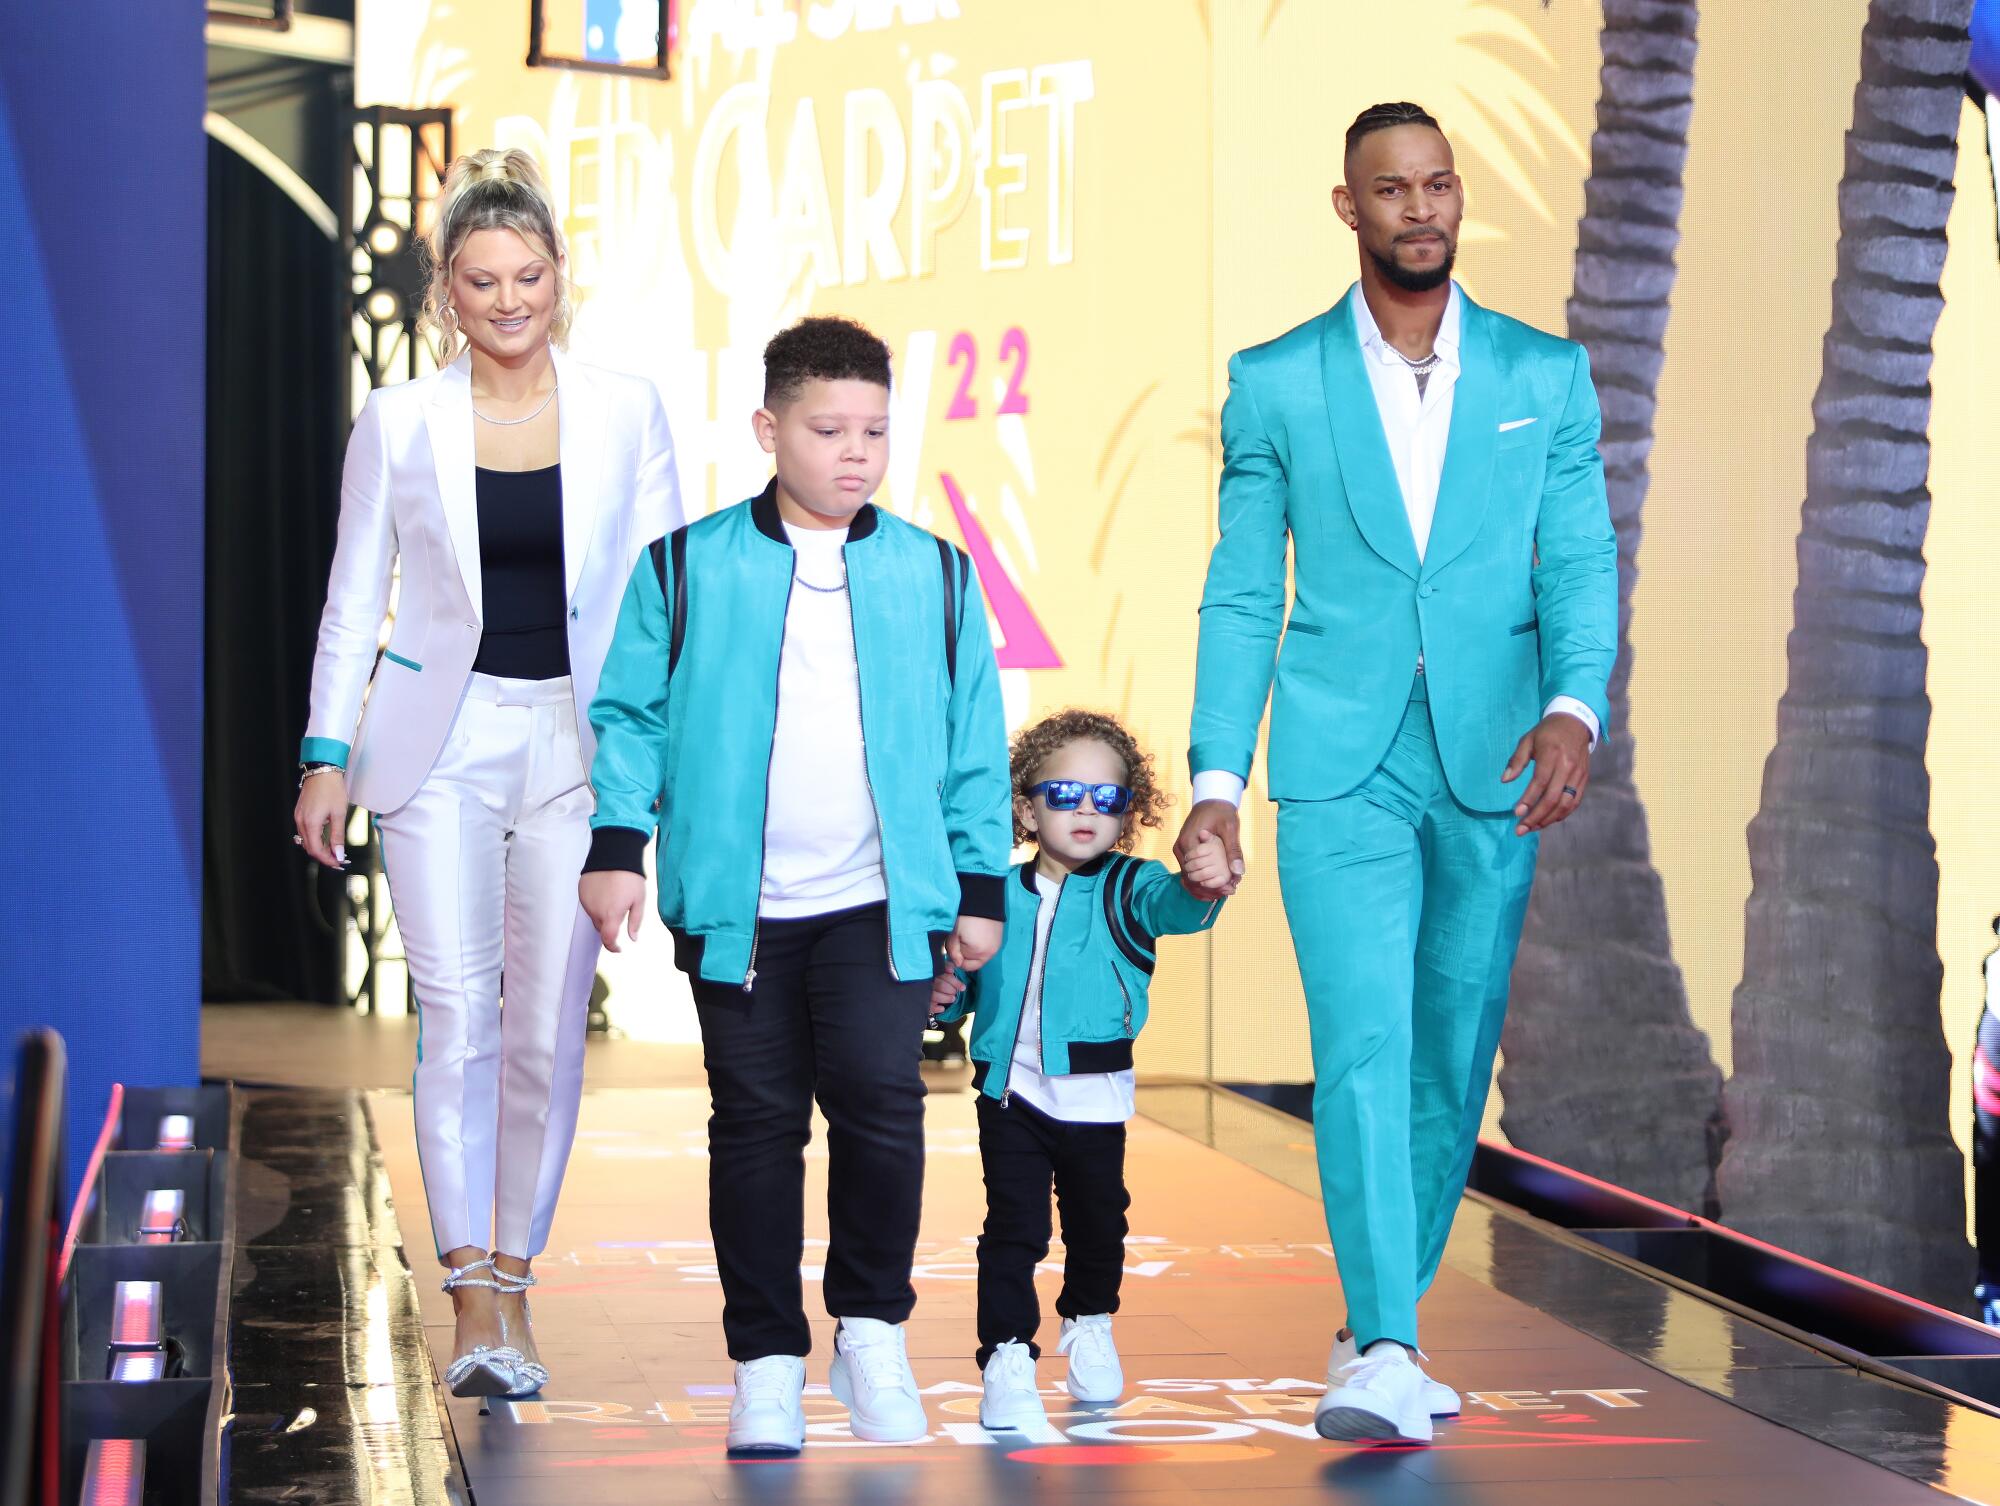 Byron Buxton in an aqua suit and family arrive at the 2022 MLB All-Star Game Red Carpet Show.